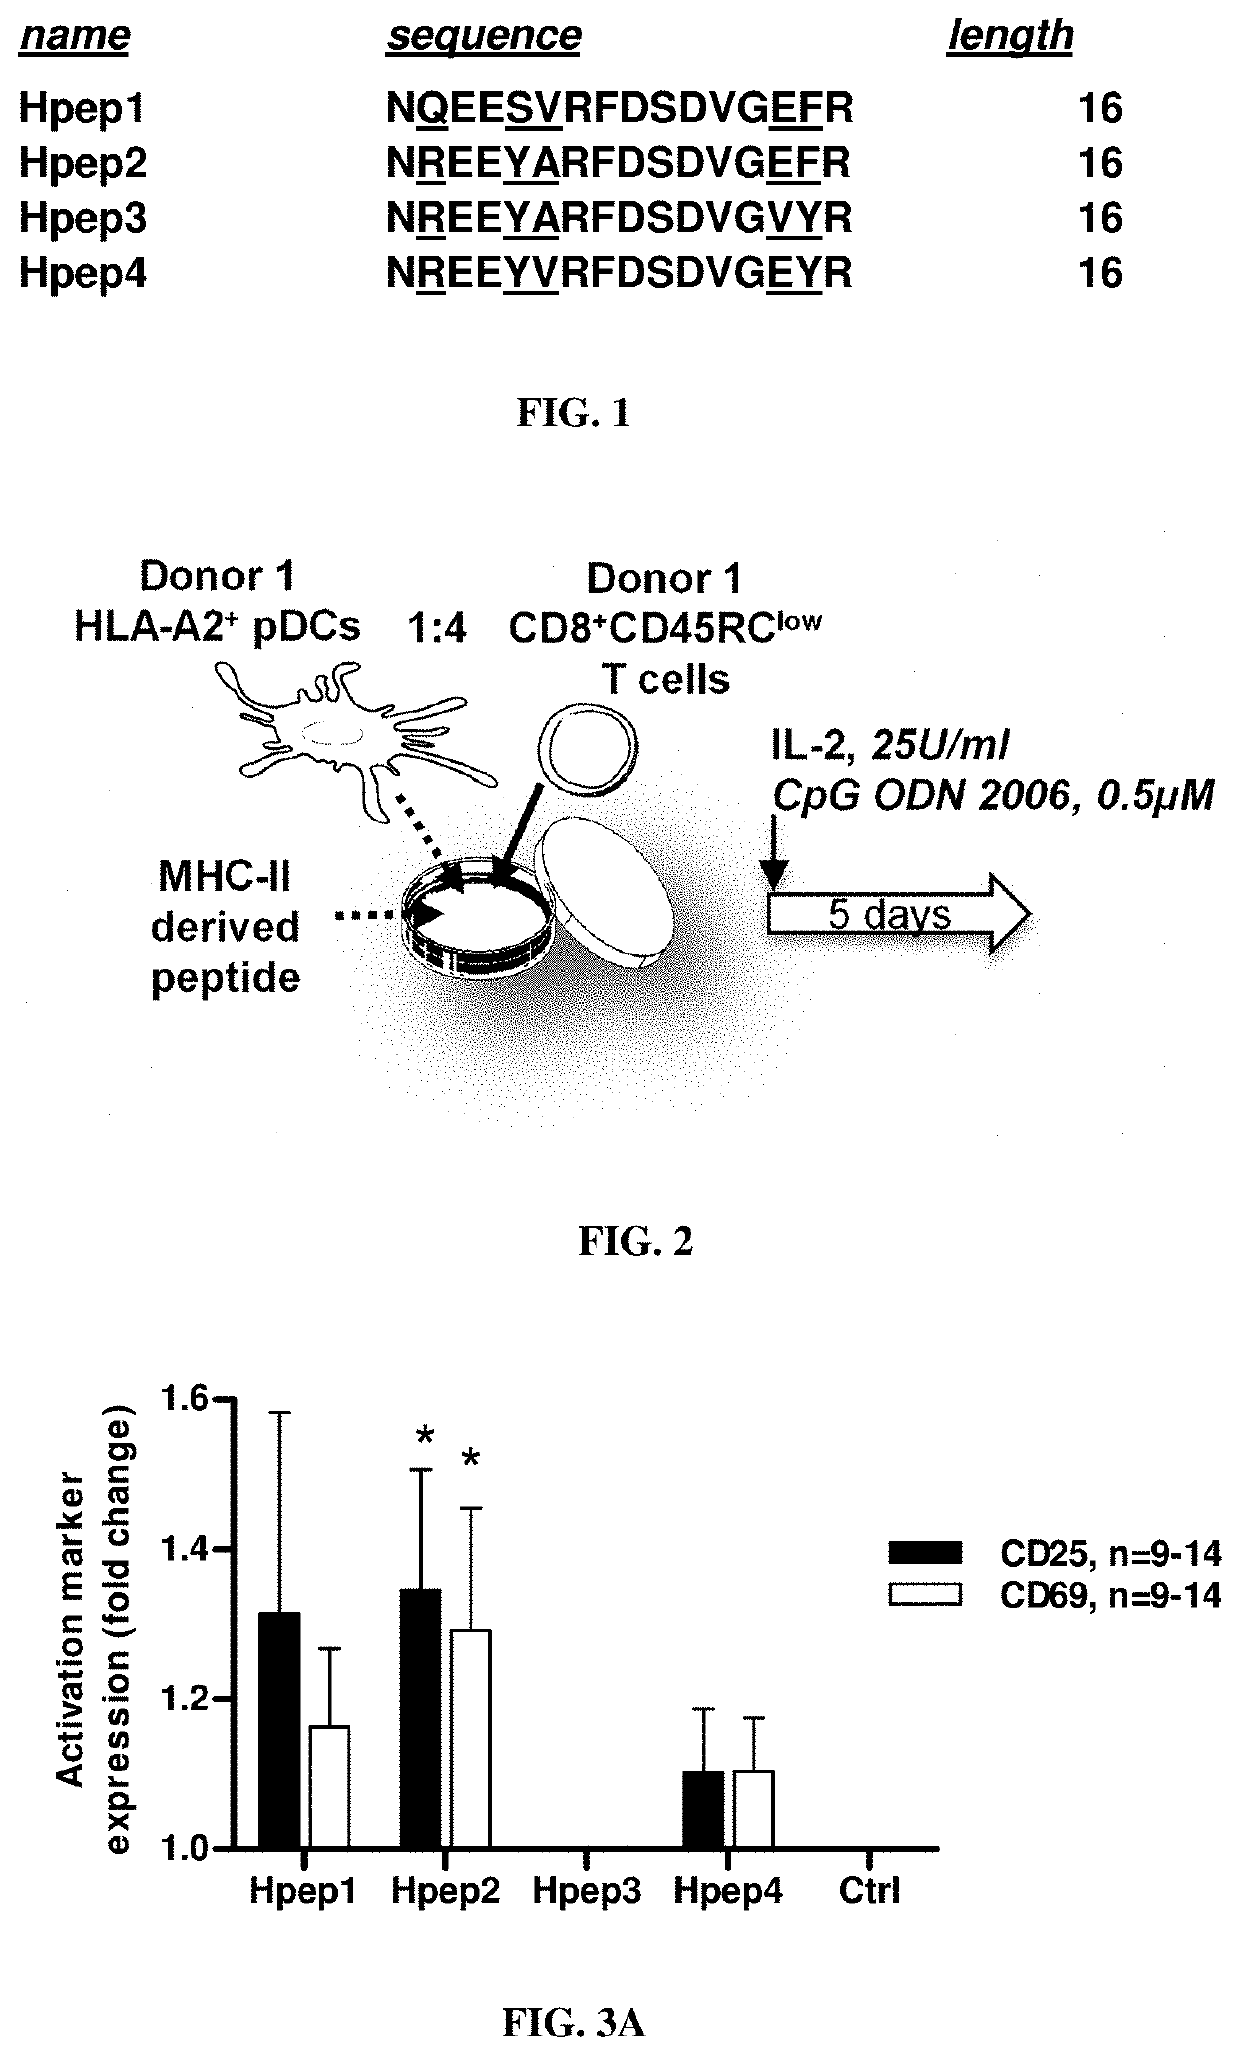 Isolated mhc-derived human peptides and uses thereof for stimulating and activating the suppressive function of cd8+cd45rclow tregs